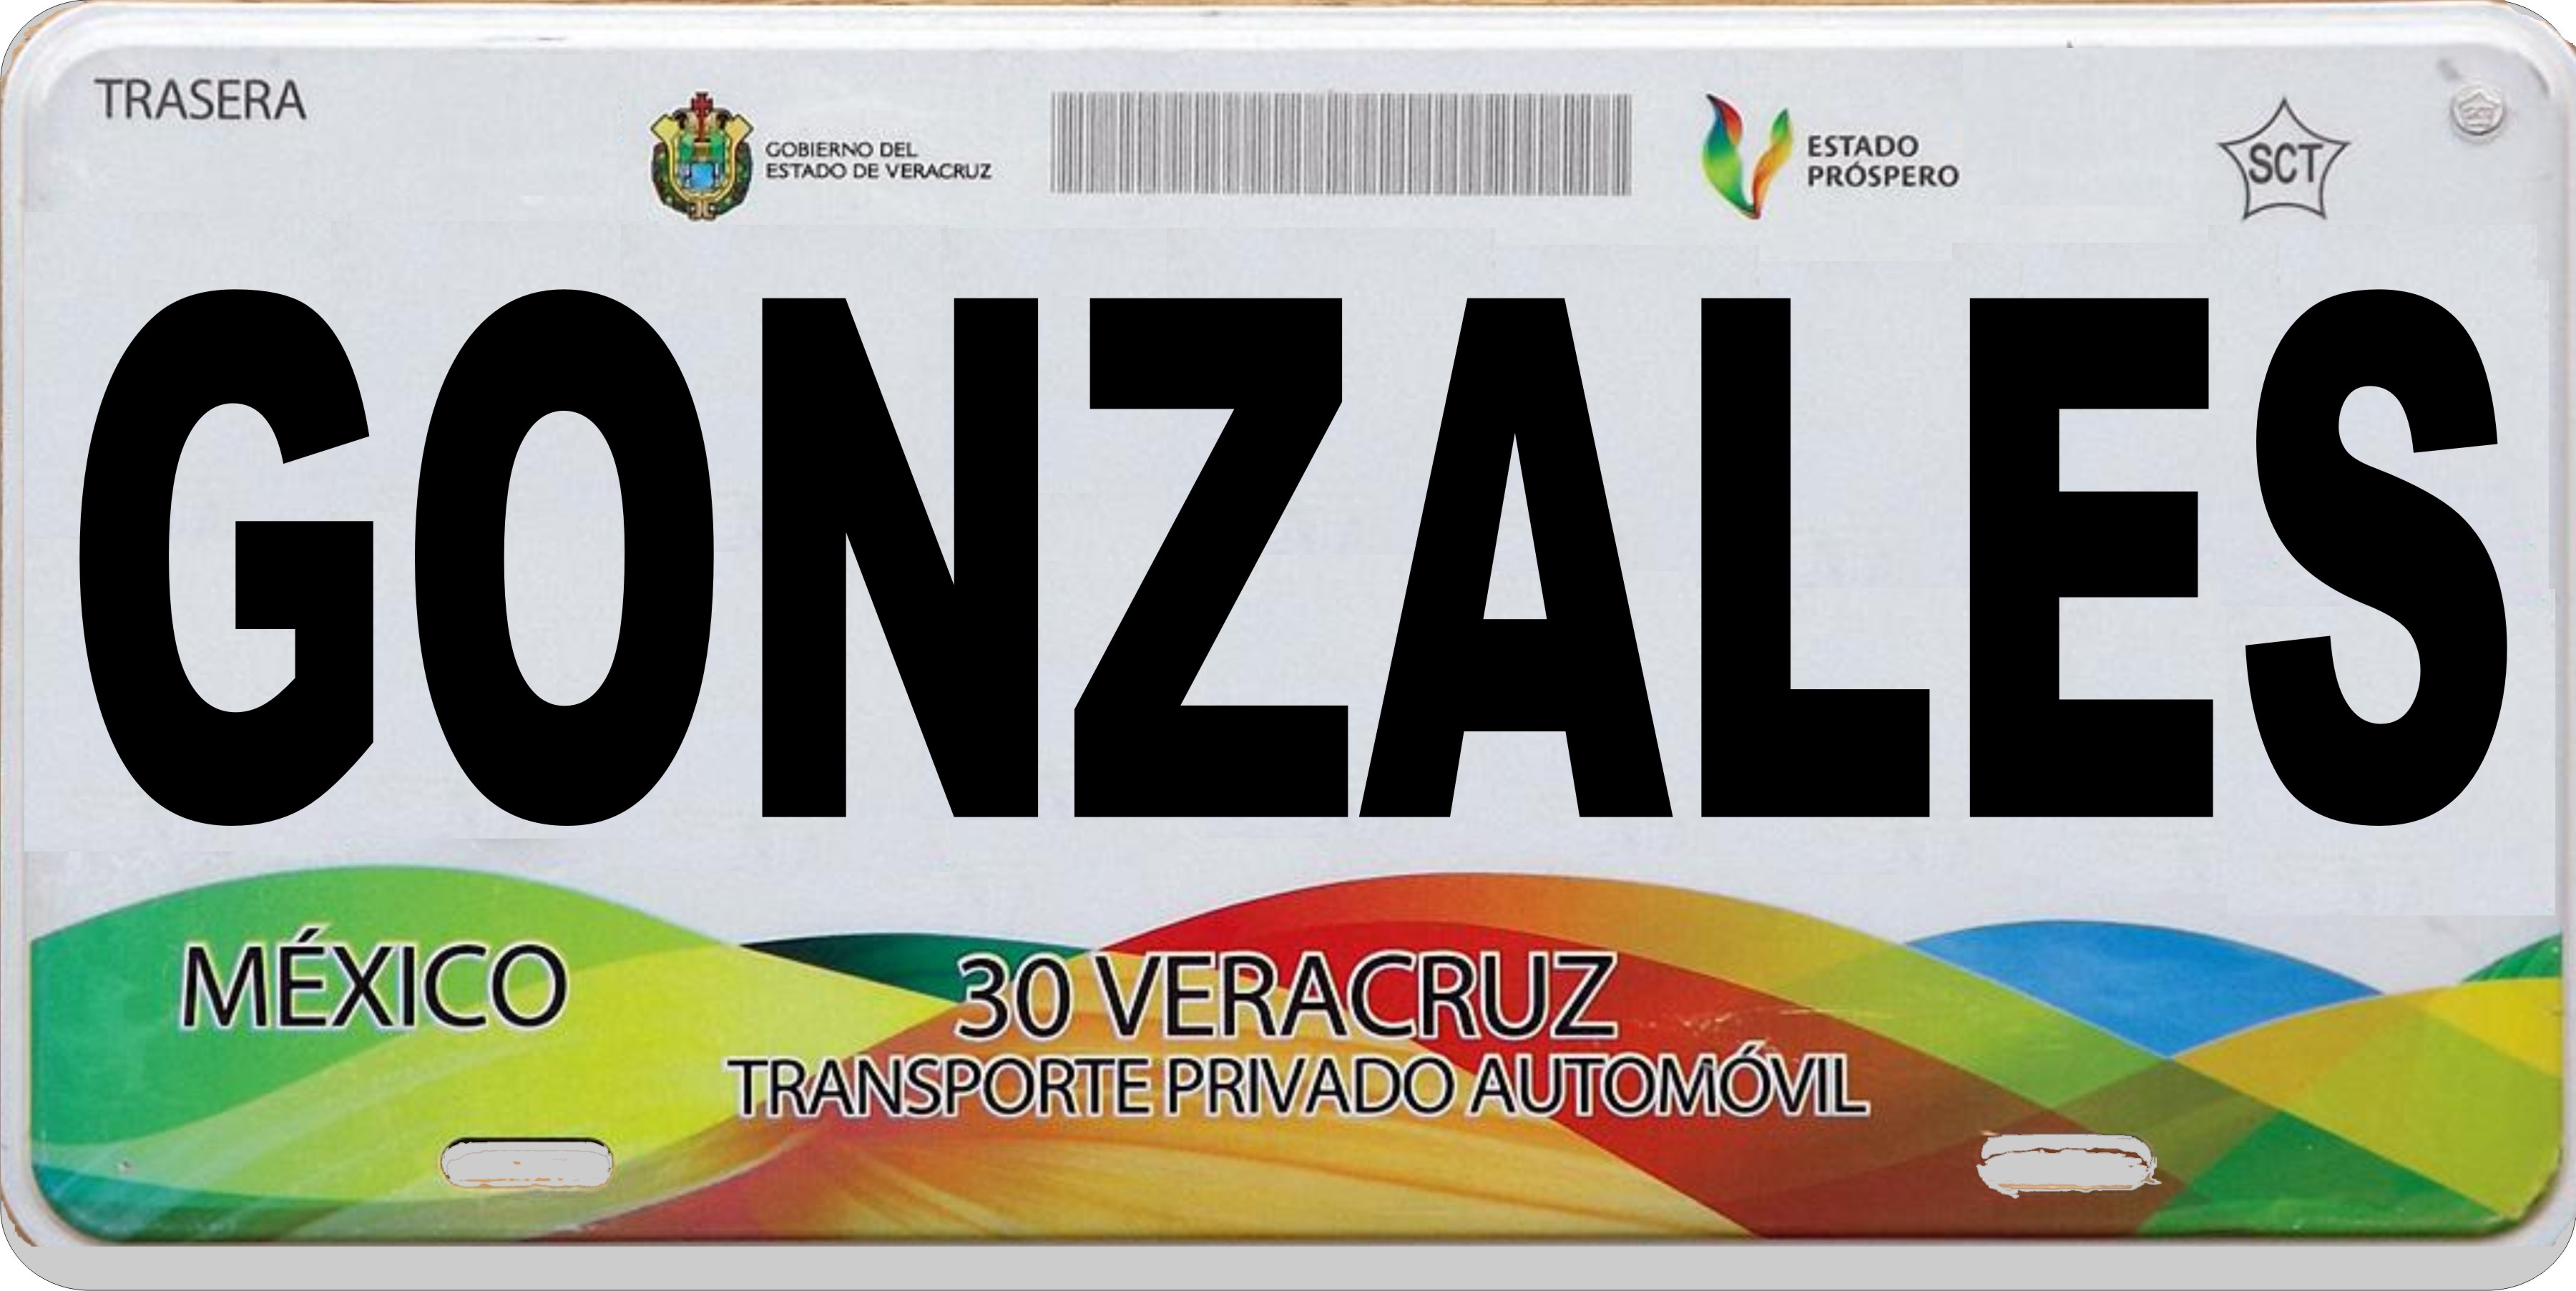 Mexico Veracruz Photo LICENSE PLATE Free Personalization on this PLATE